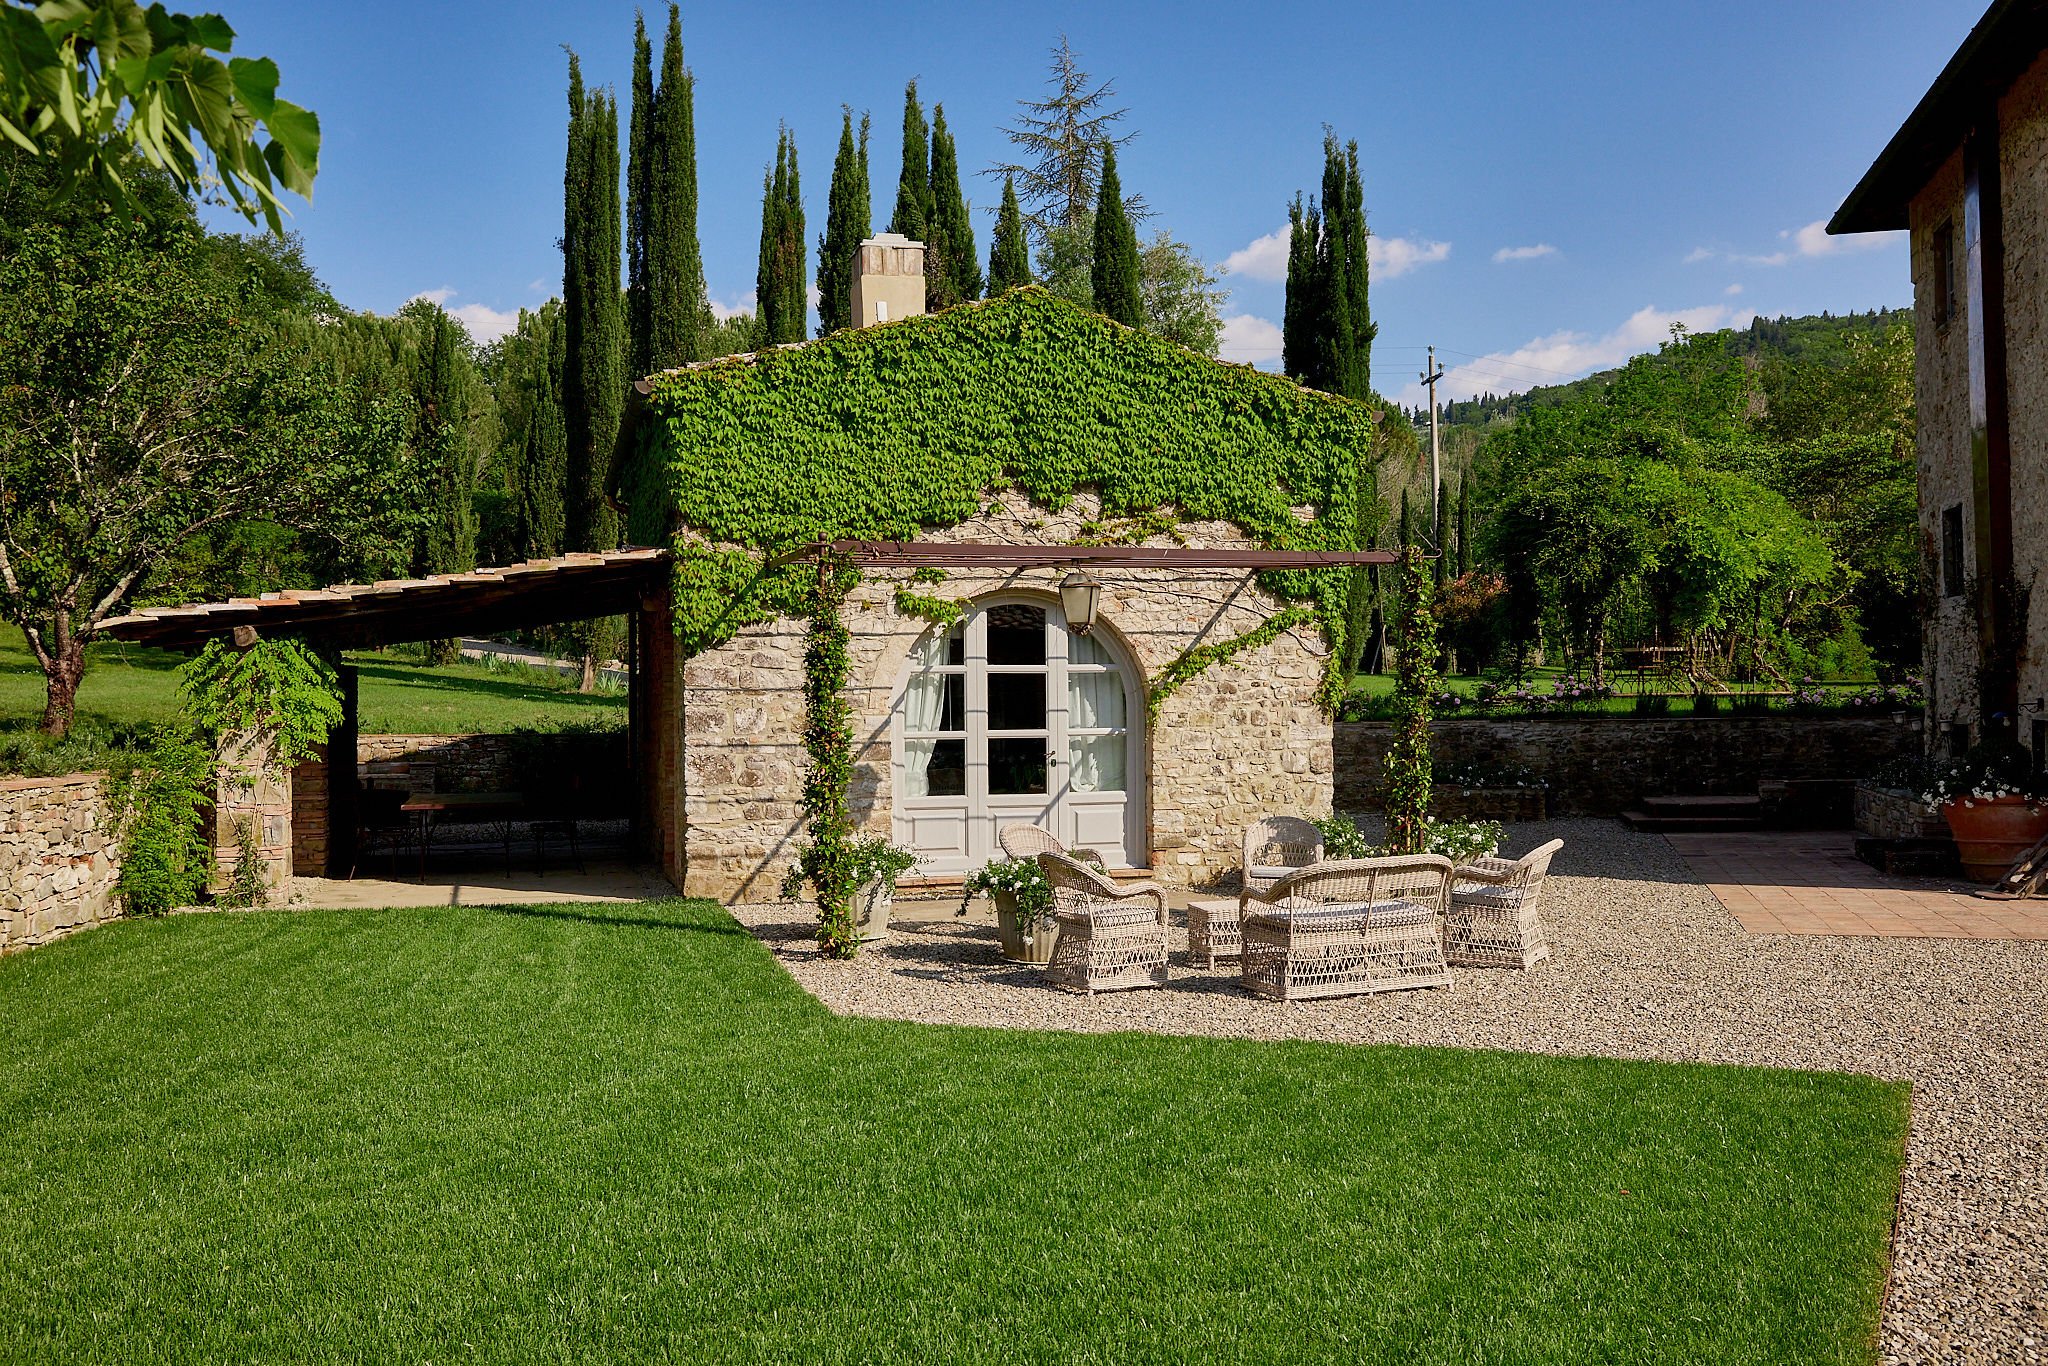 Francis York NEW Luxury Holiday Rental in the Chianti Hills, Tuscany Booking This Summer  44.jpg